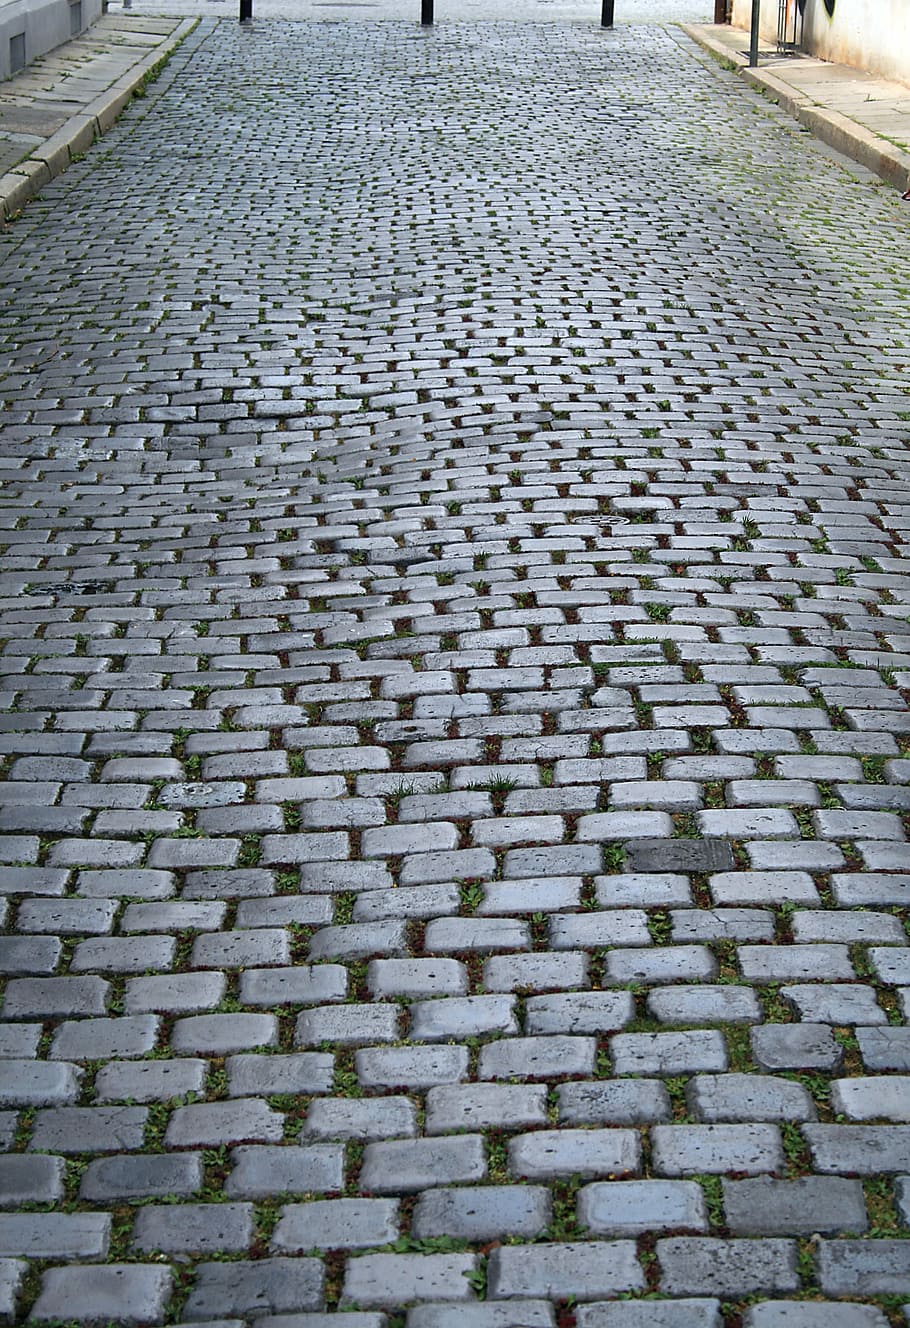 Paved Road, Alley, Paving Stones, road, away, cobblestones, pattern, day, outdoors, close-up